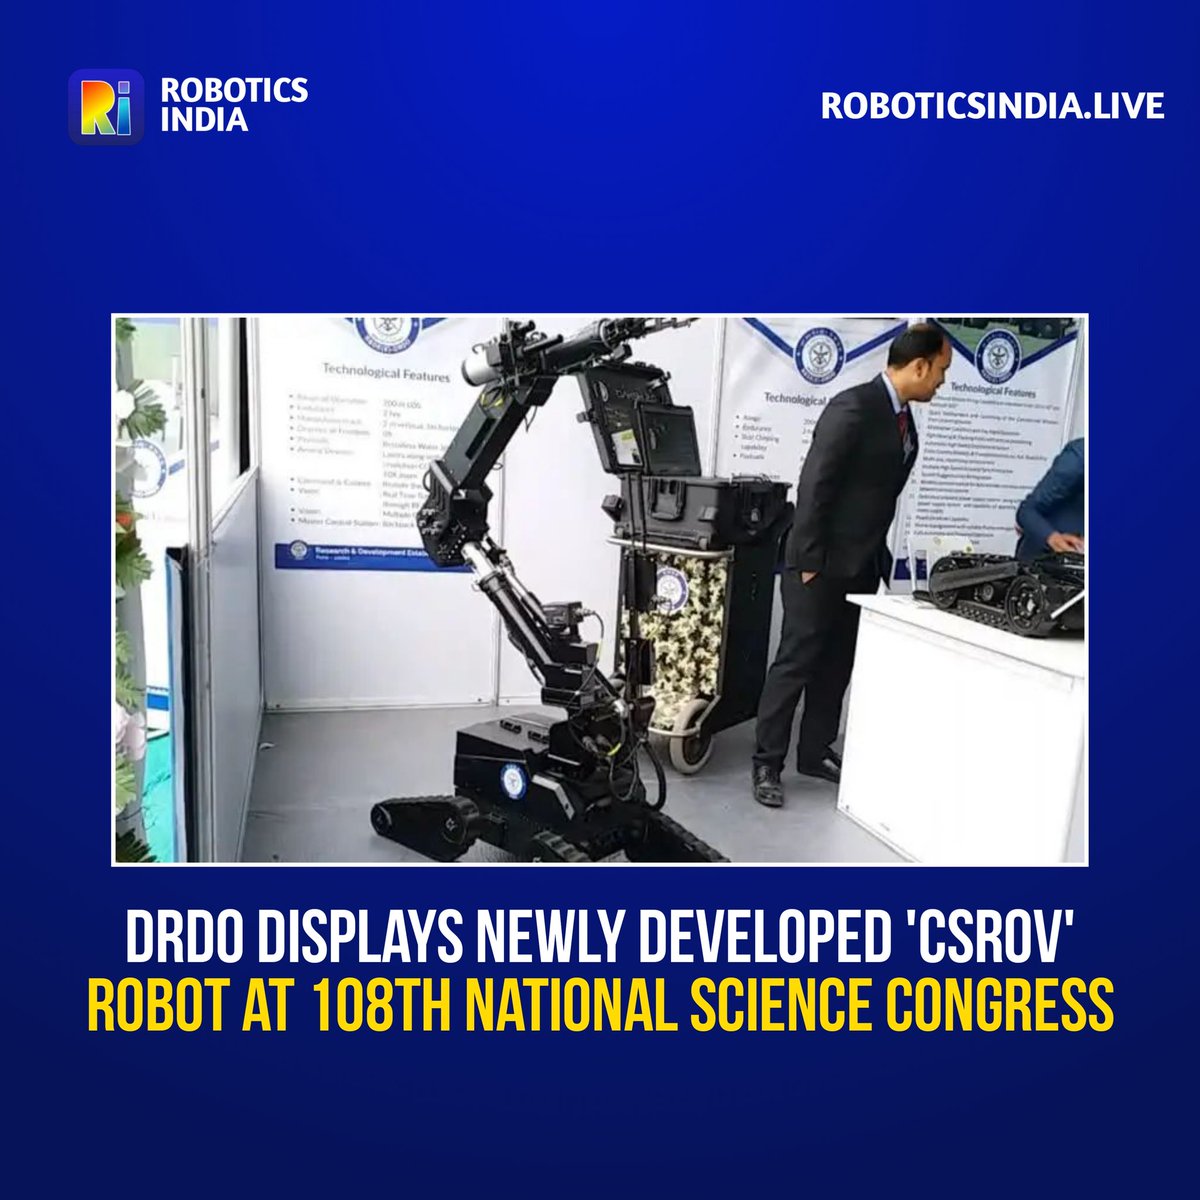 DRDO displays the newly developed 'CSROV' robot at the 108th National Science Congress.

#roboticsindia #robotics #robots #roboticsengineering #roboticsclub #technews #roboticsnews #roboticsforkids #roboticslab #technology #drdo #drdorobots #defence